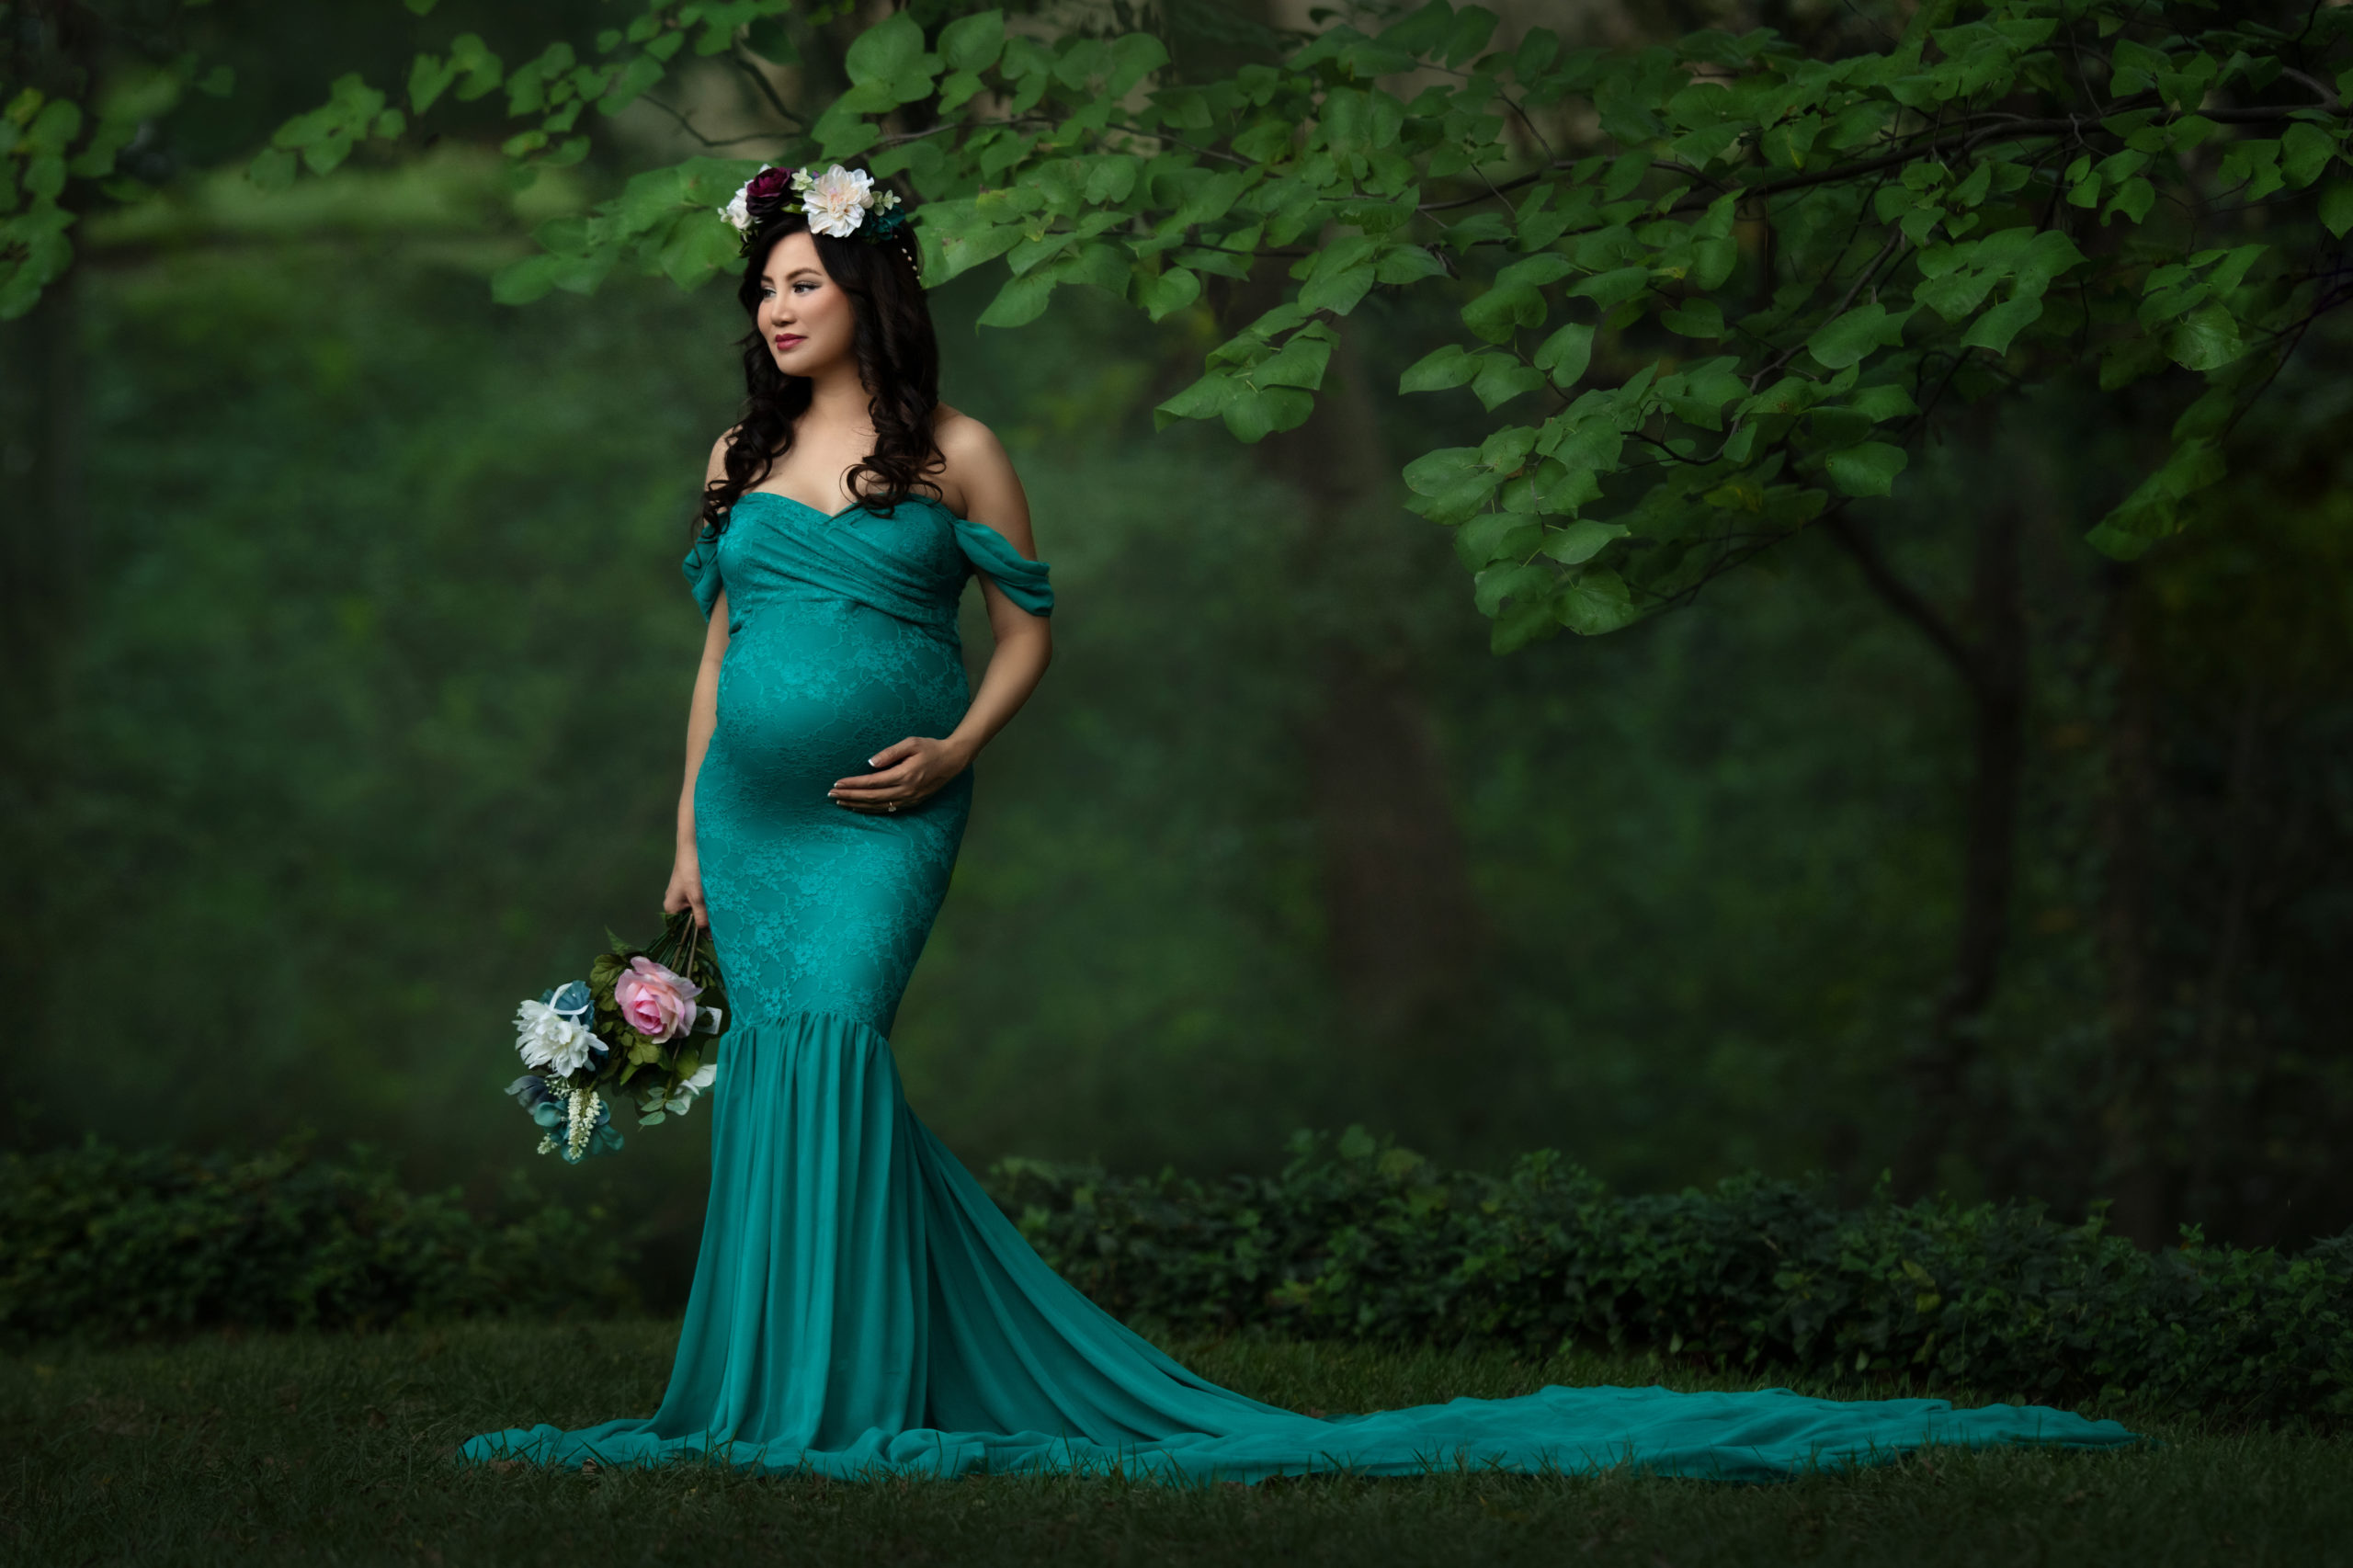 gorgeous pregnant woman in turquoise maternity gown in nature green spring session outdoors garden in dallas texas for fine art maternity photoshoot